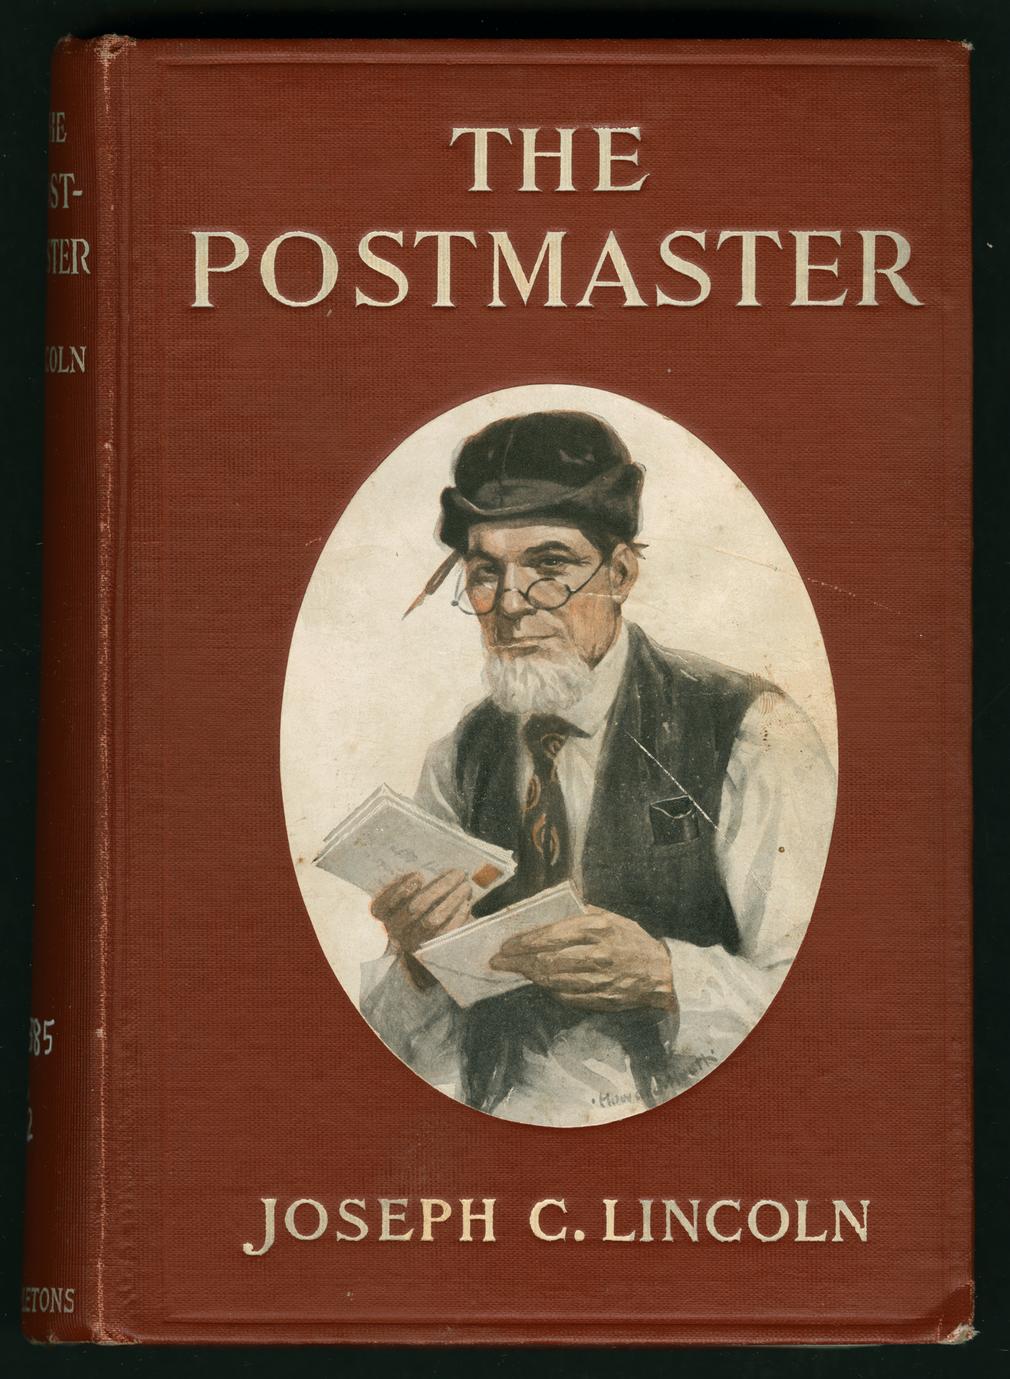 The postmaster (1 of 3)